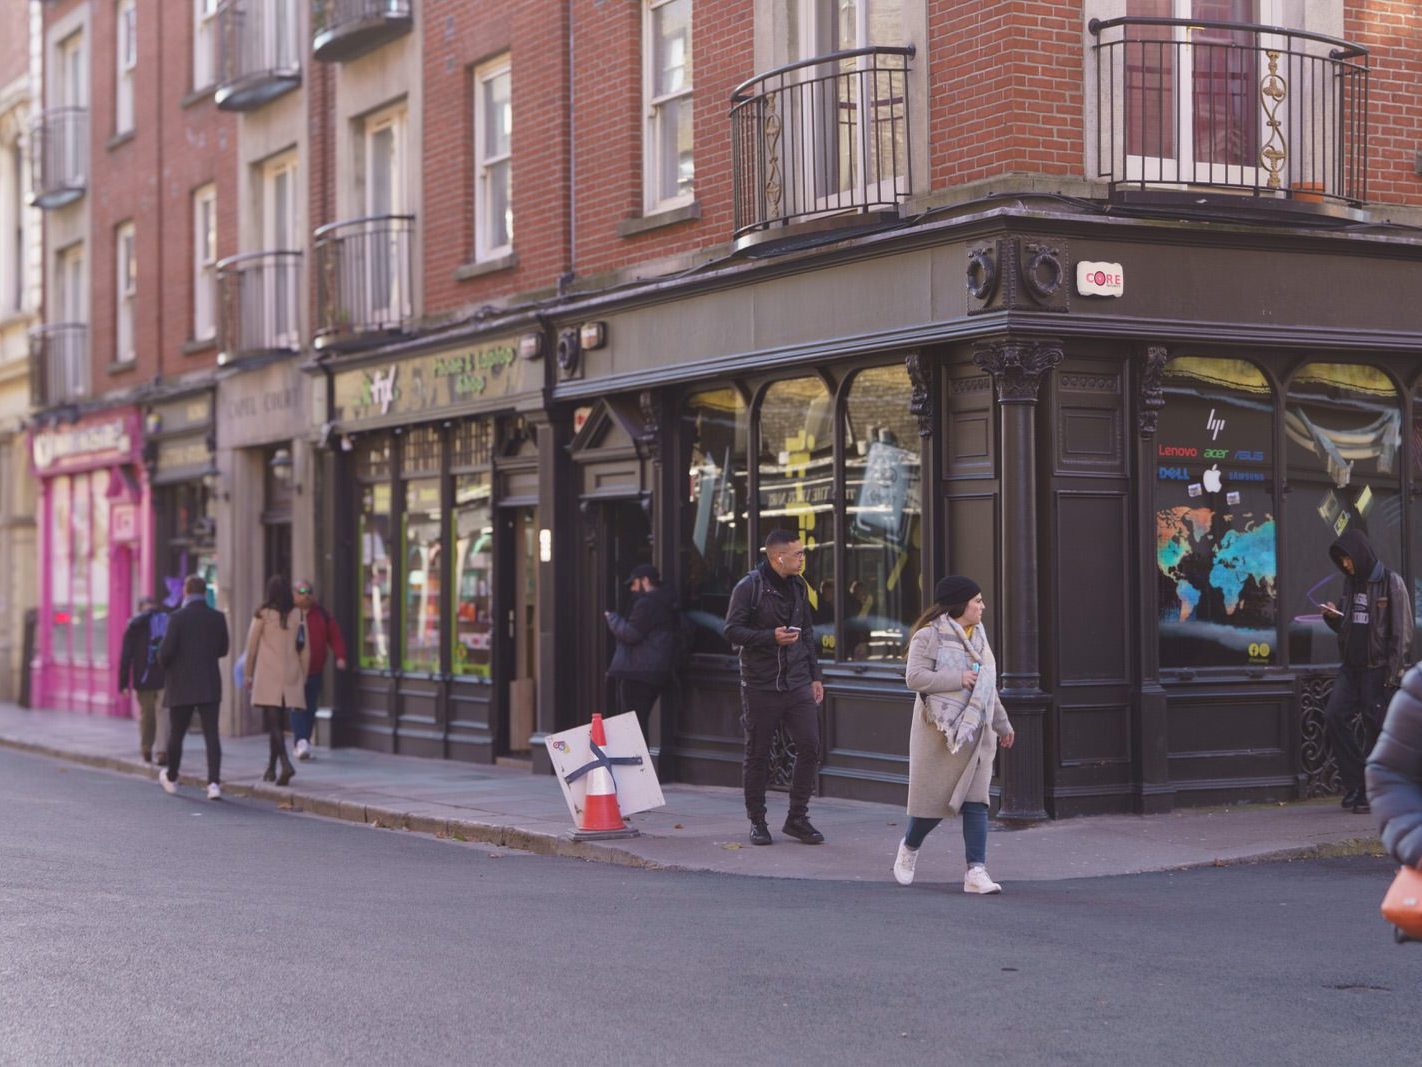 CAPEL STREET IS STILL A W.I.P. [THE PERIOD BETWEEN HALLOWEEN AND CHRISTMAS]-224791-1